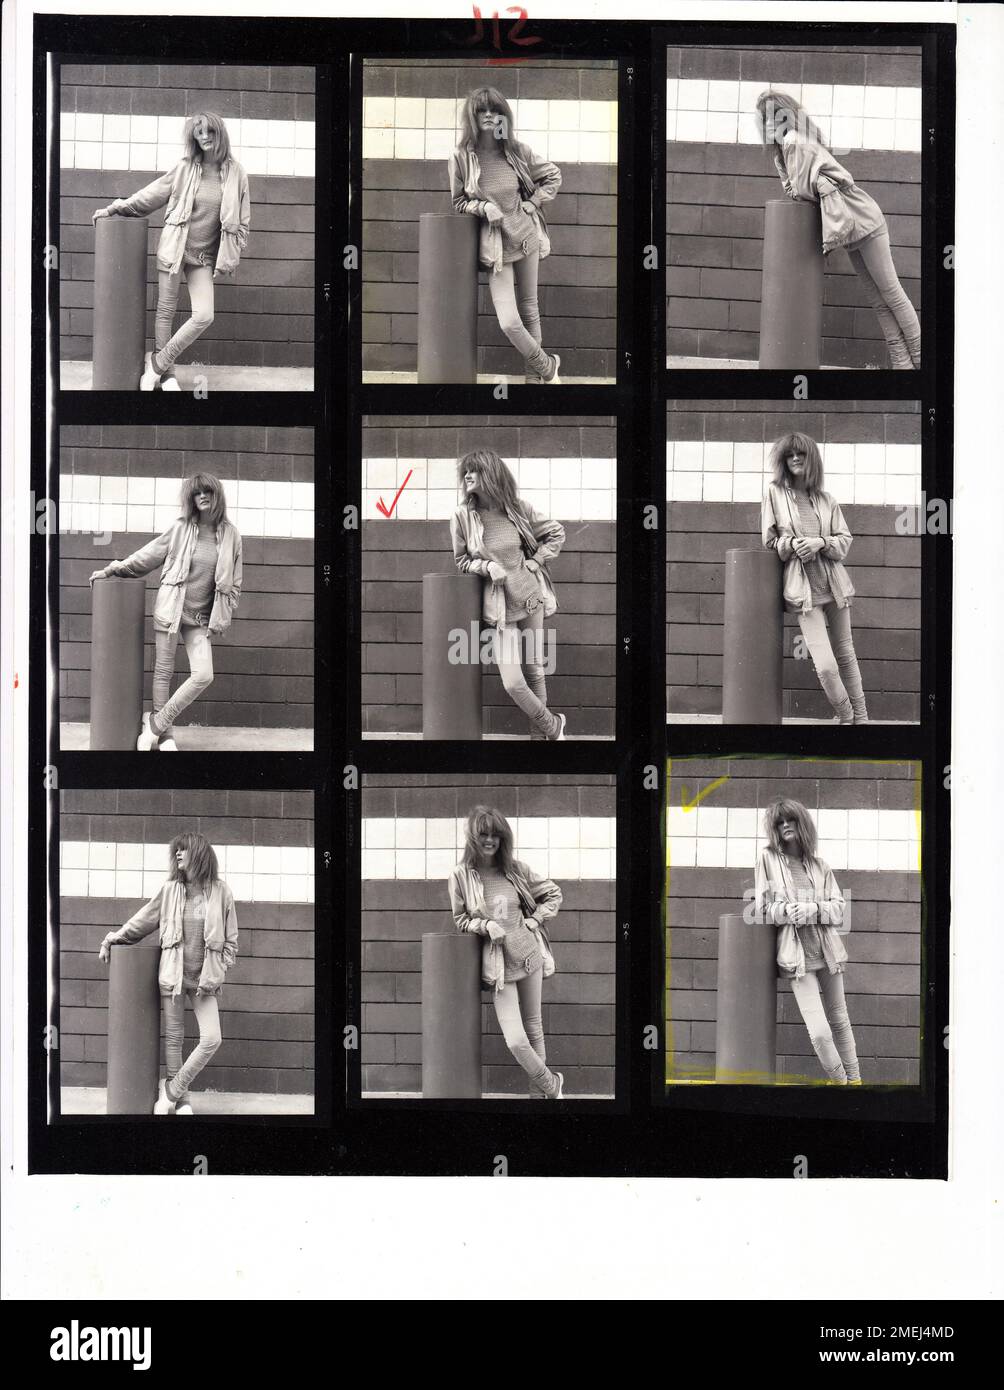 CARLA BLEY, Jazz Musician. a contact sheet of 12 different poses. 1983. Stock Photo